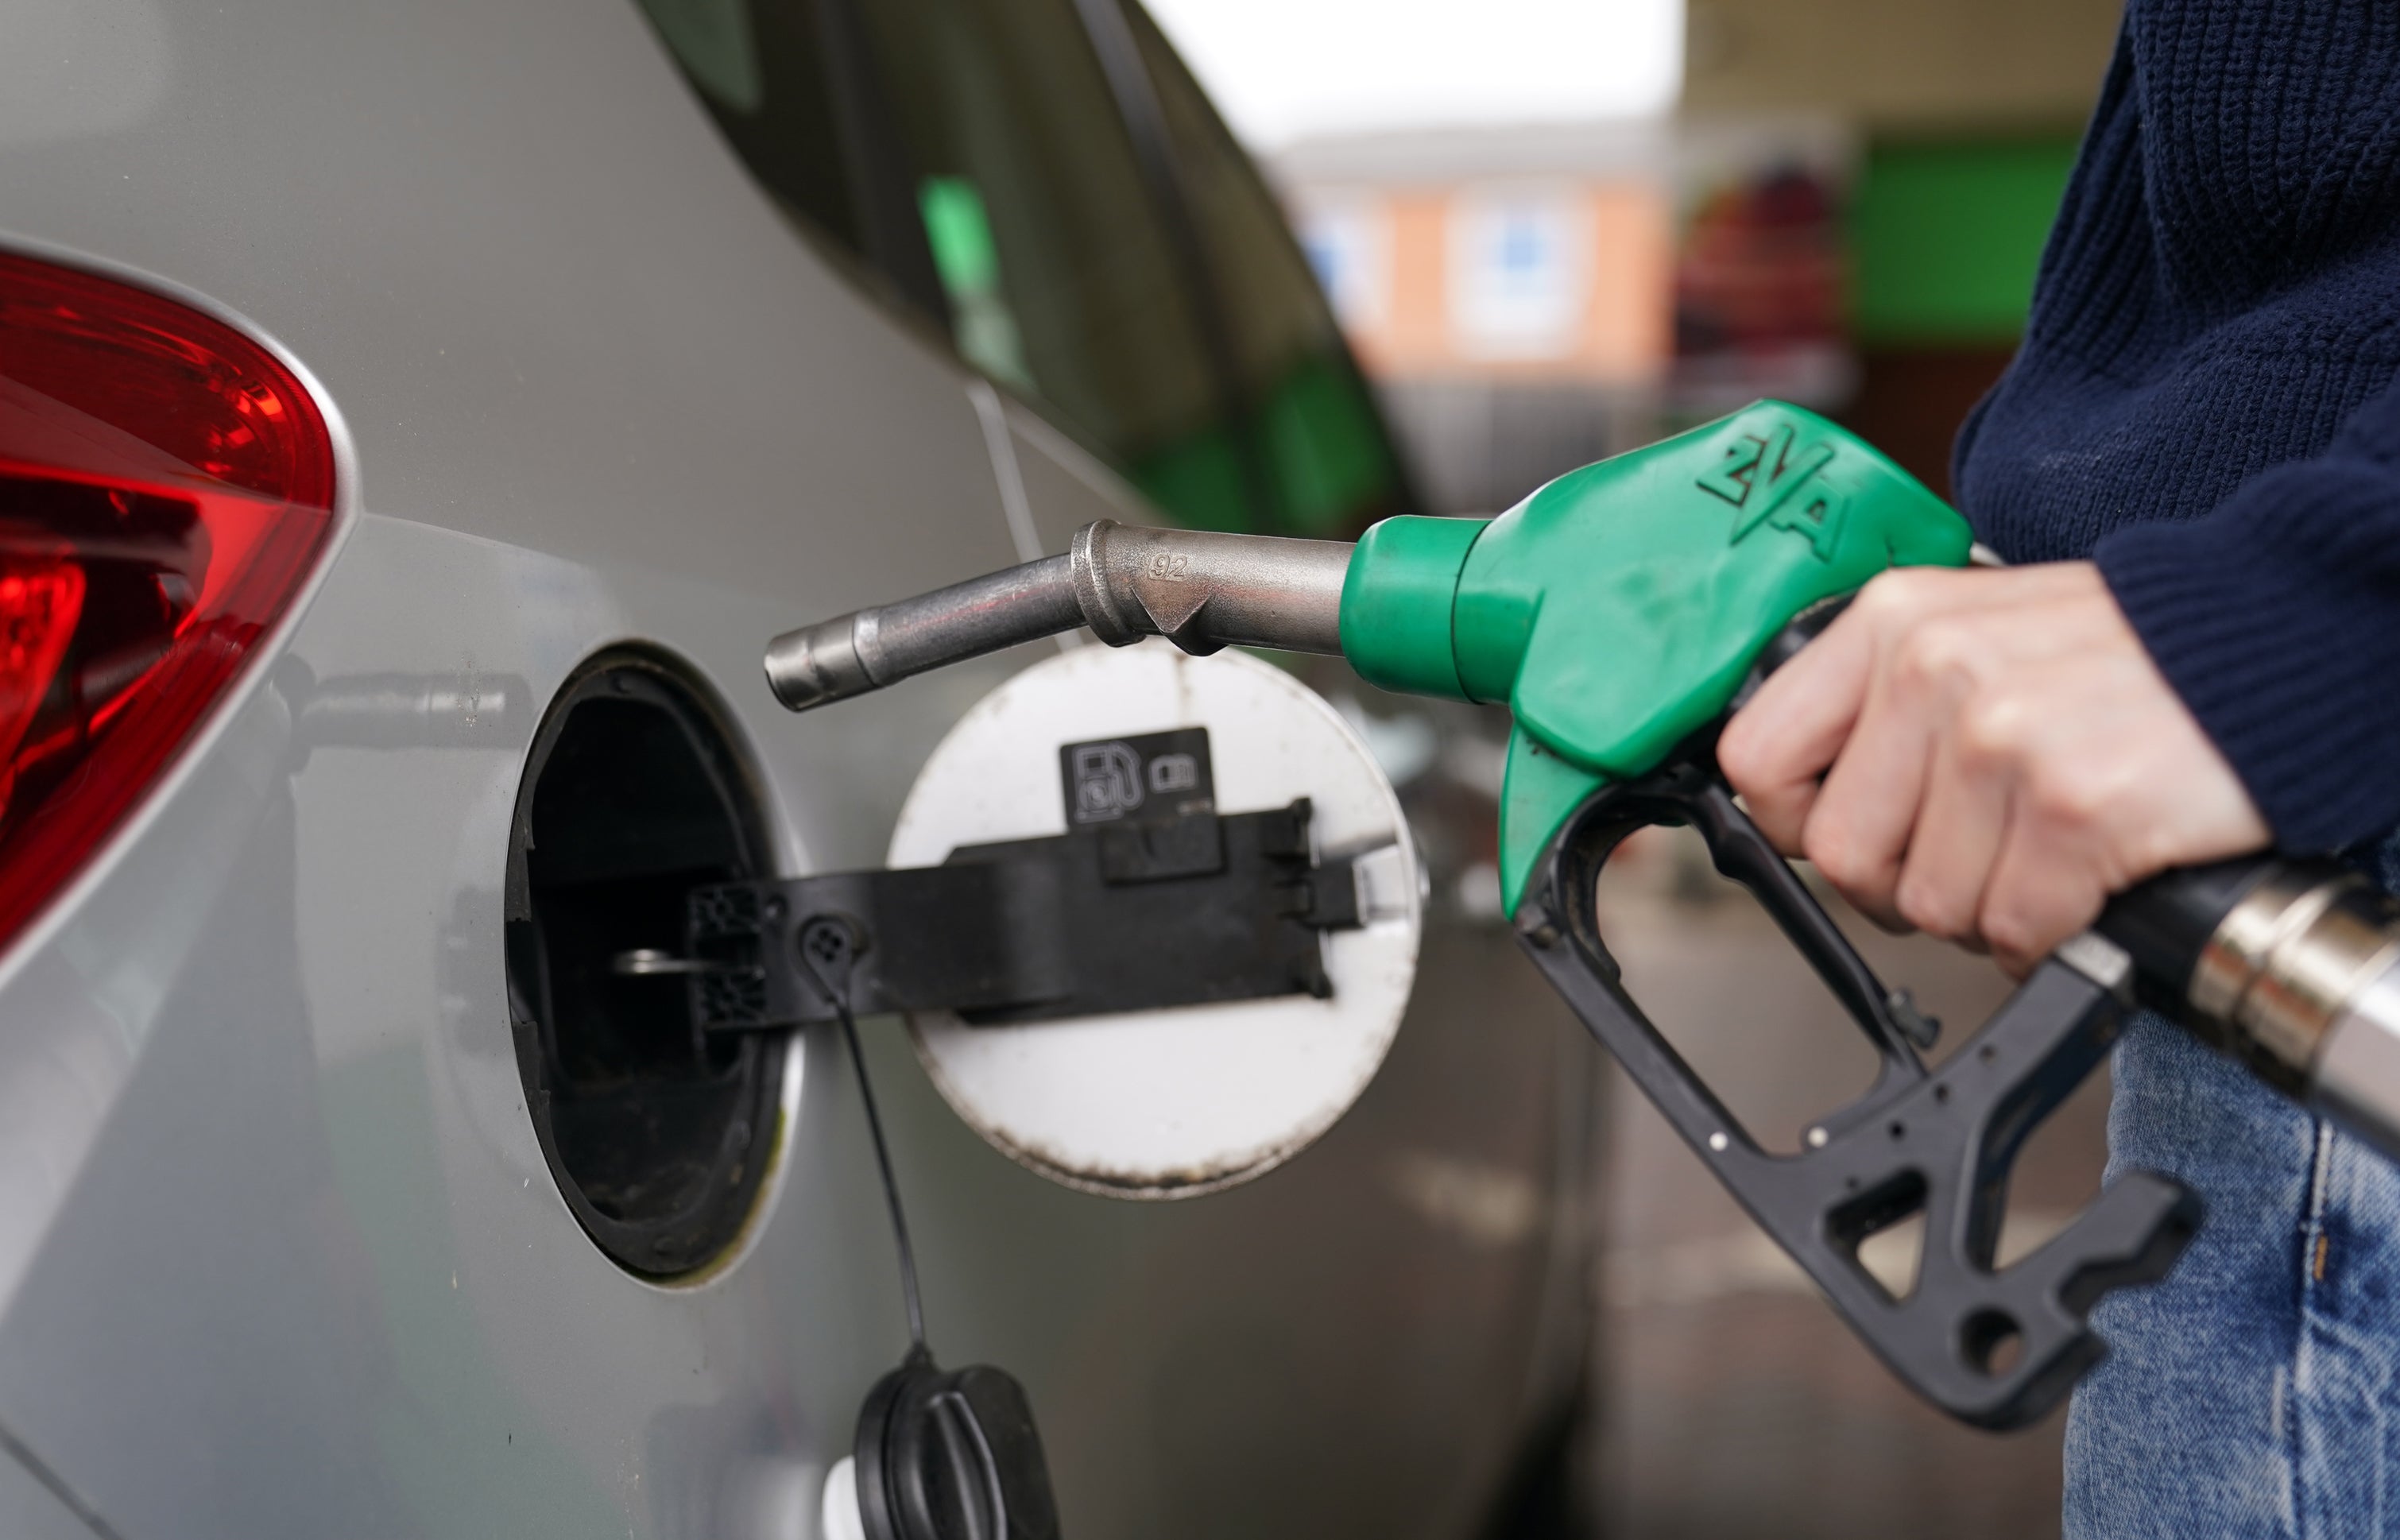 Independent fuel retailers are leading the way on charging ‘a fair price’ for petrol and diesel, according to new analysis (Joe Giddens/PA)